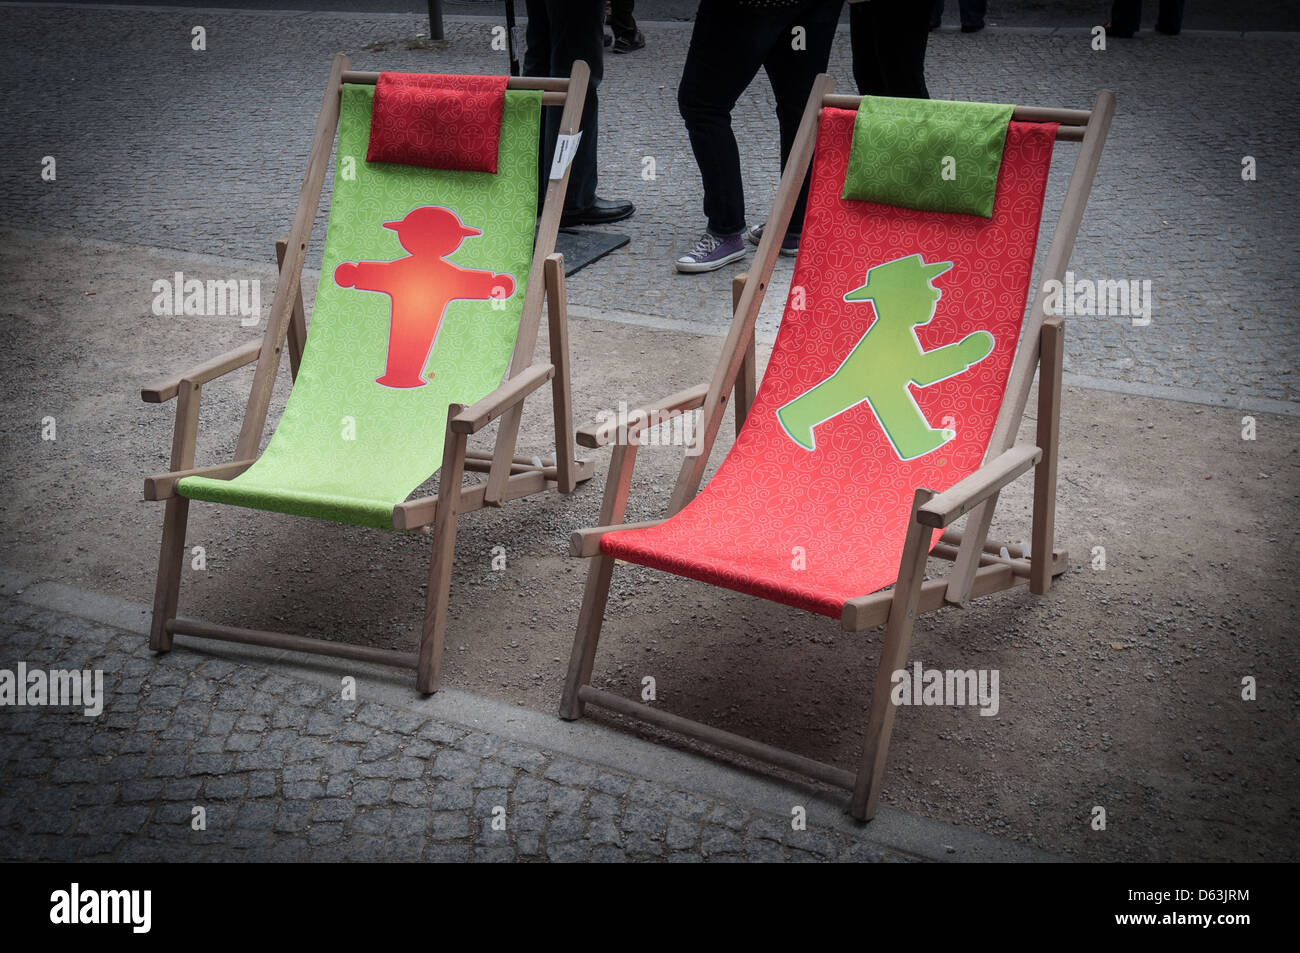 Ampelmann souvenir in Berlin. Germany. This little traffic light man has become the symbol of the city. Stock Photo